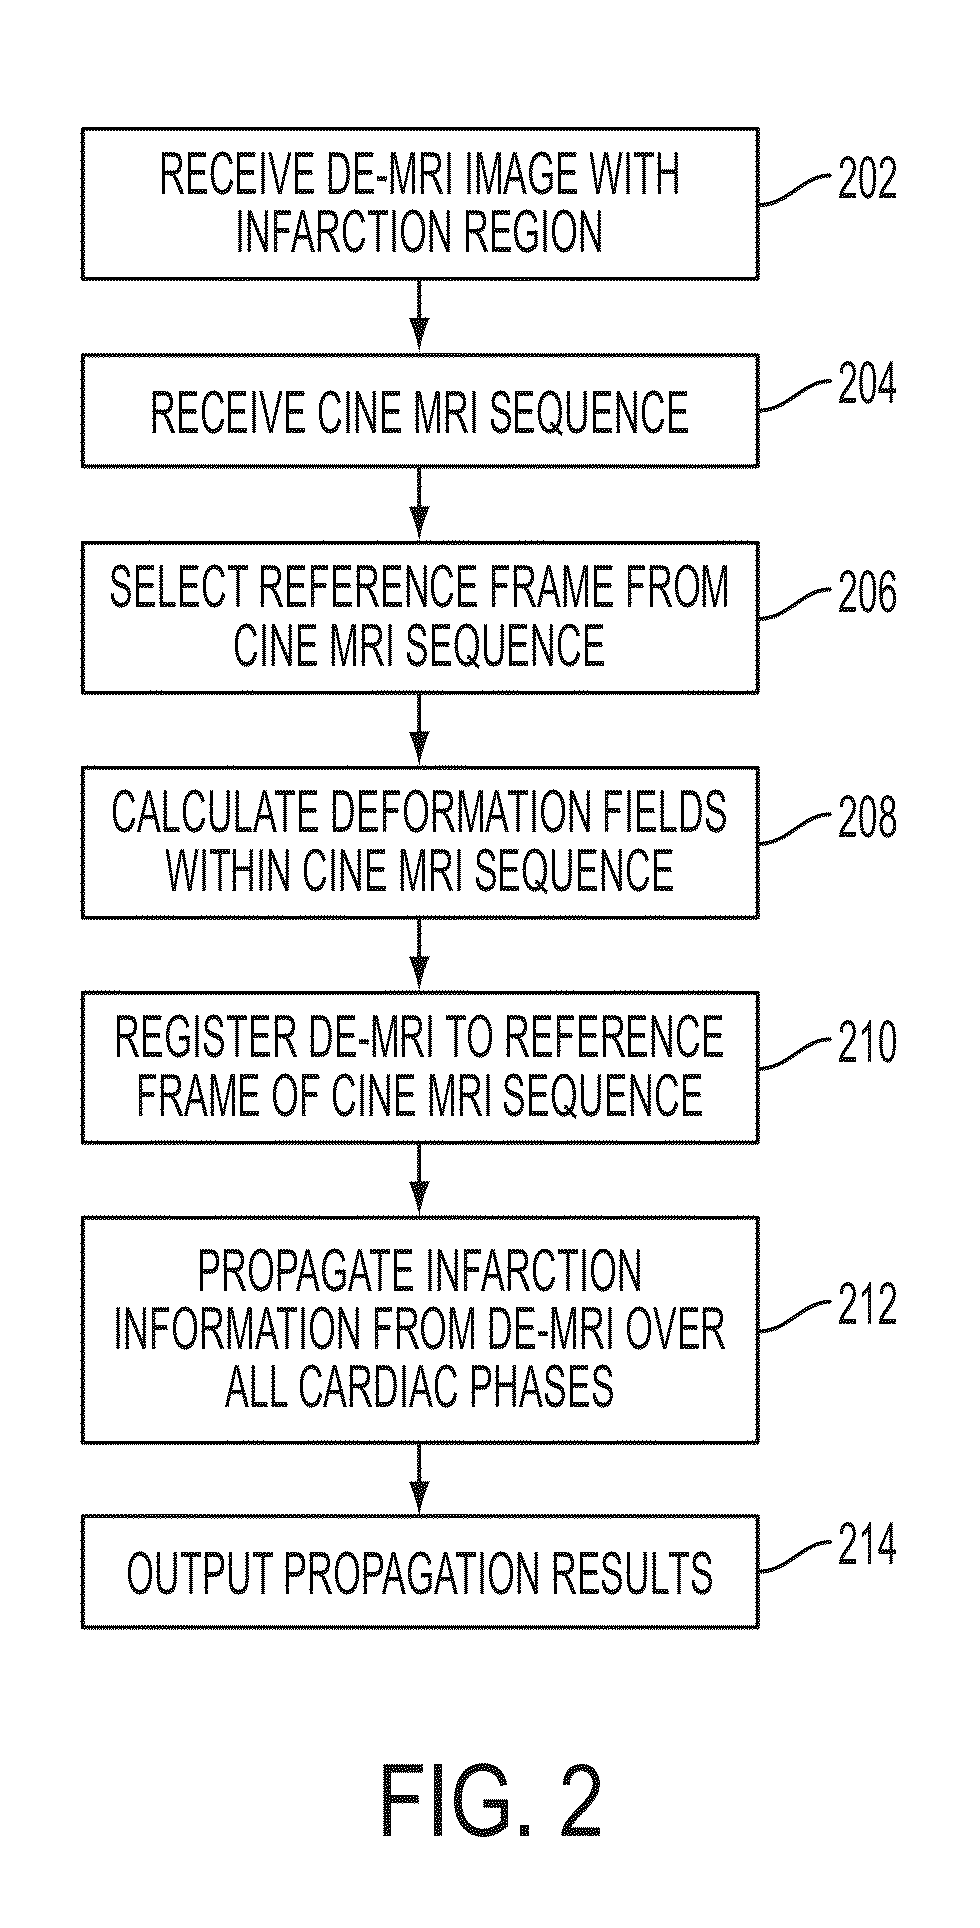 Method and system for propagation of myocardial infarction from delayed enhanced cardiac imaging to cine magnetic resonance imaging using hybrid image registration